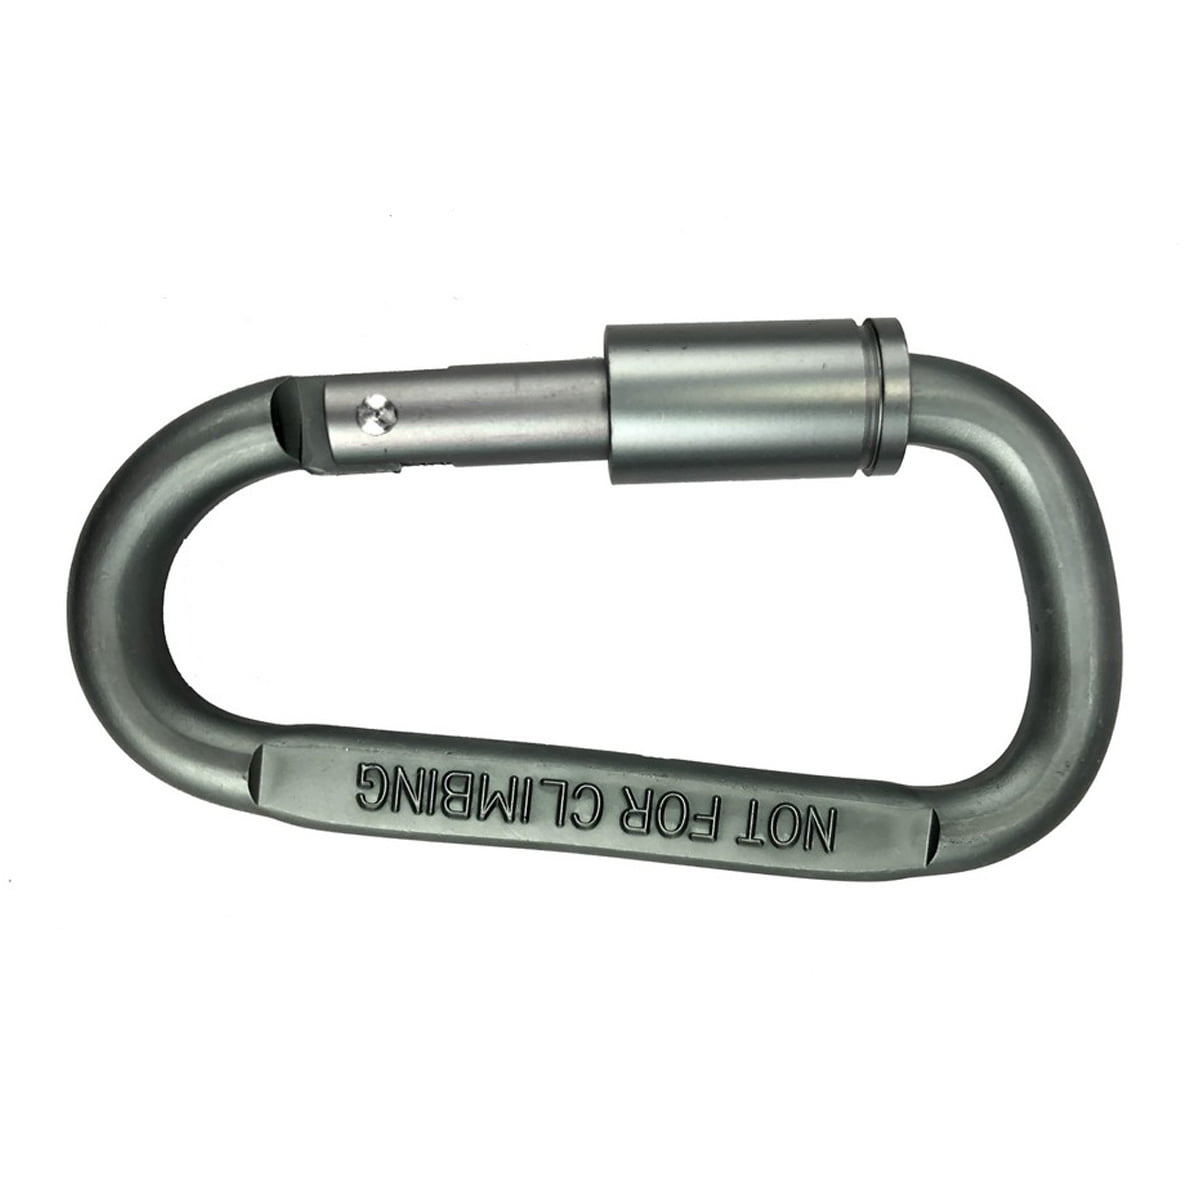 Details about   Steel Key Chain Clip Hook Buckle Keychain Ring Carabiner Climbing X7Z1 